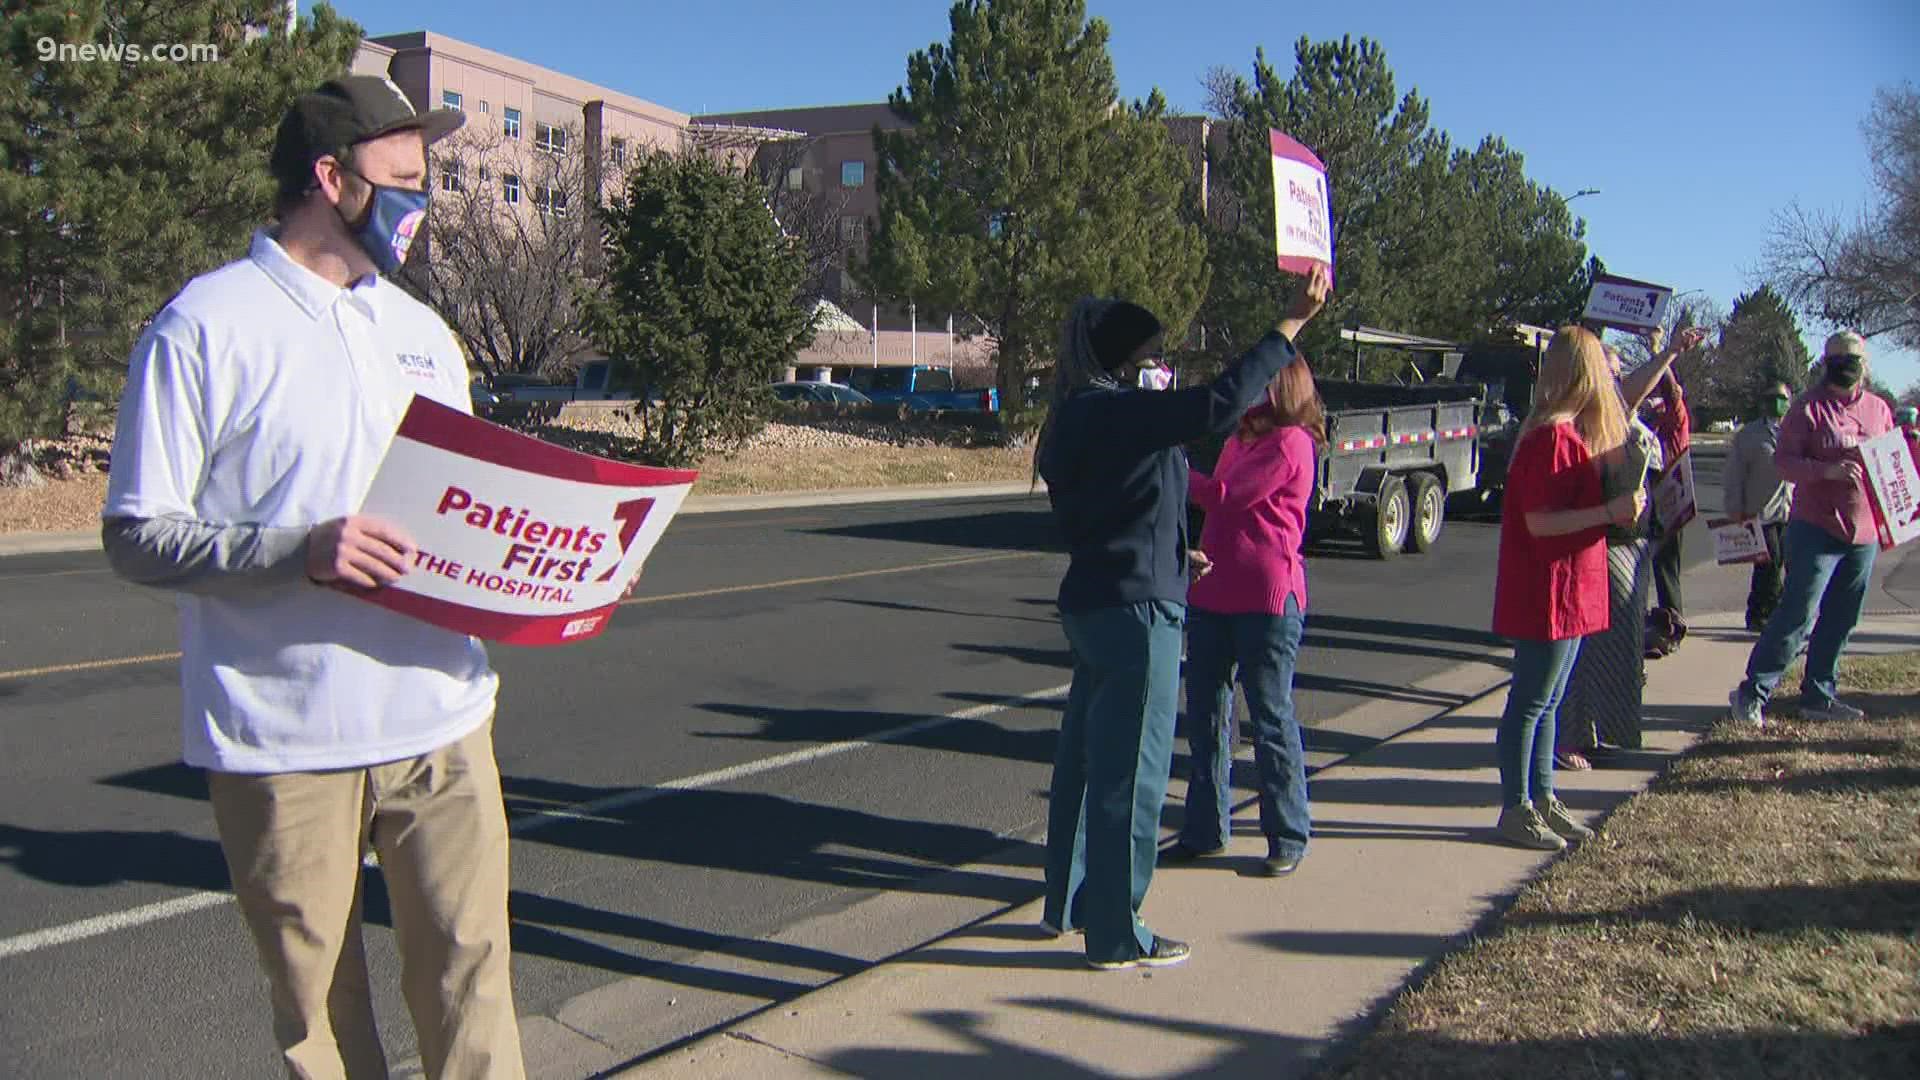 Nurses held a "speak out" event Thursday to voice their concerns.